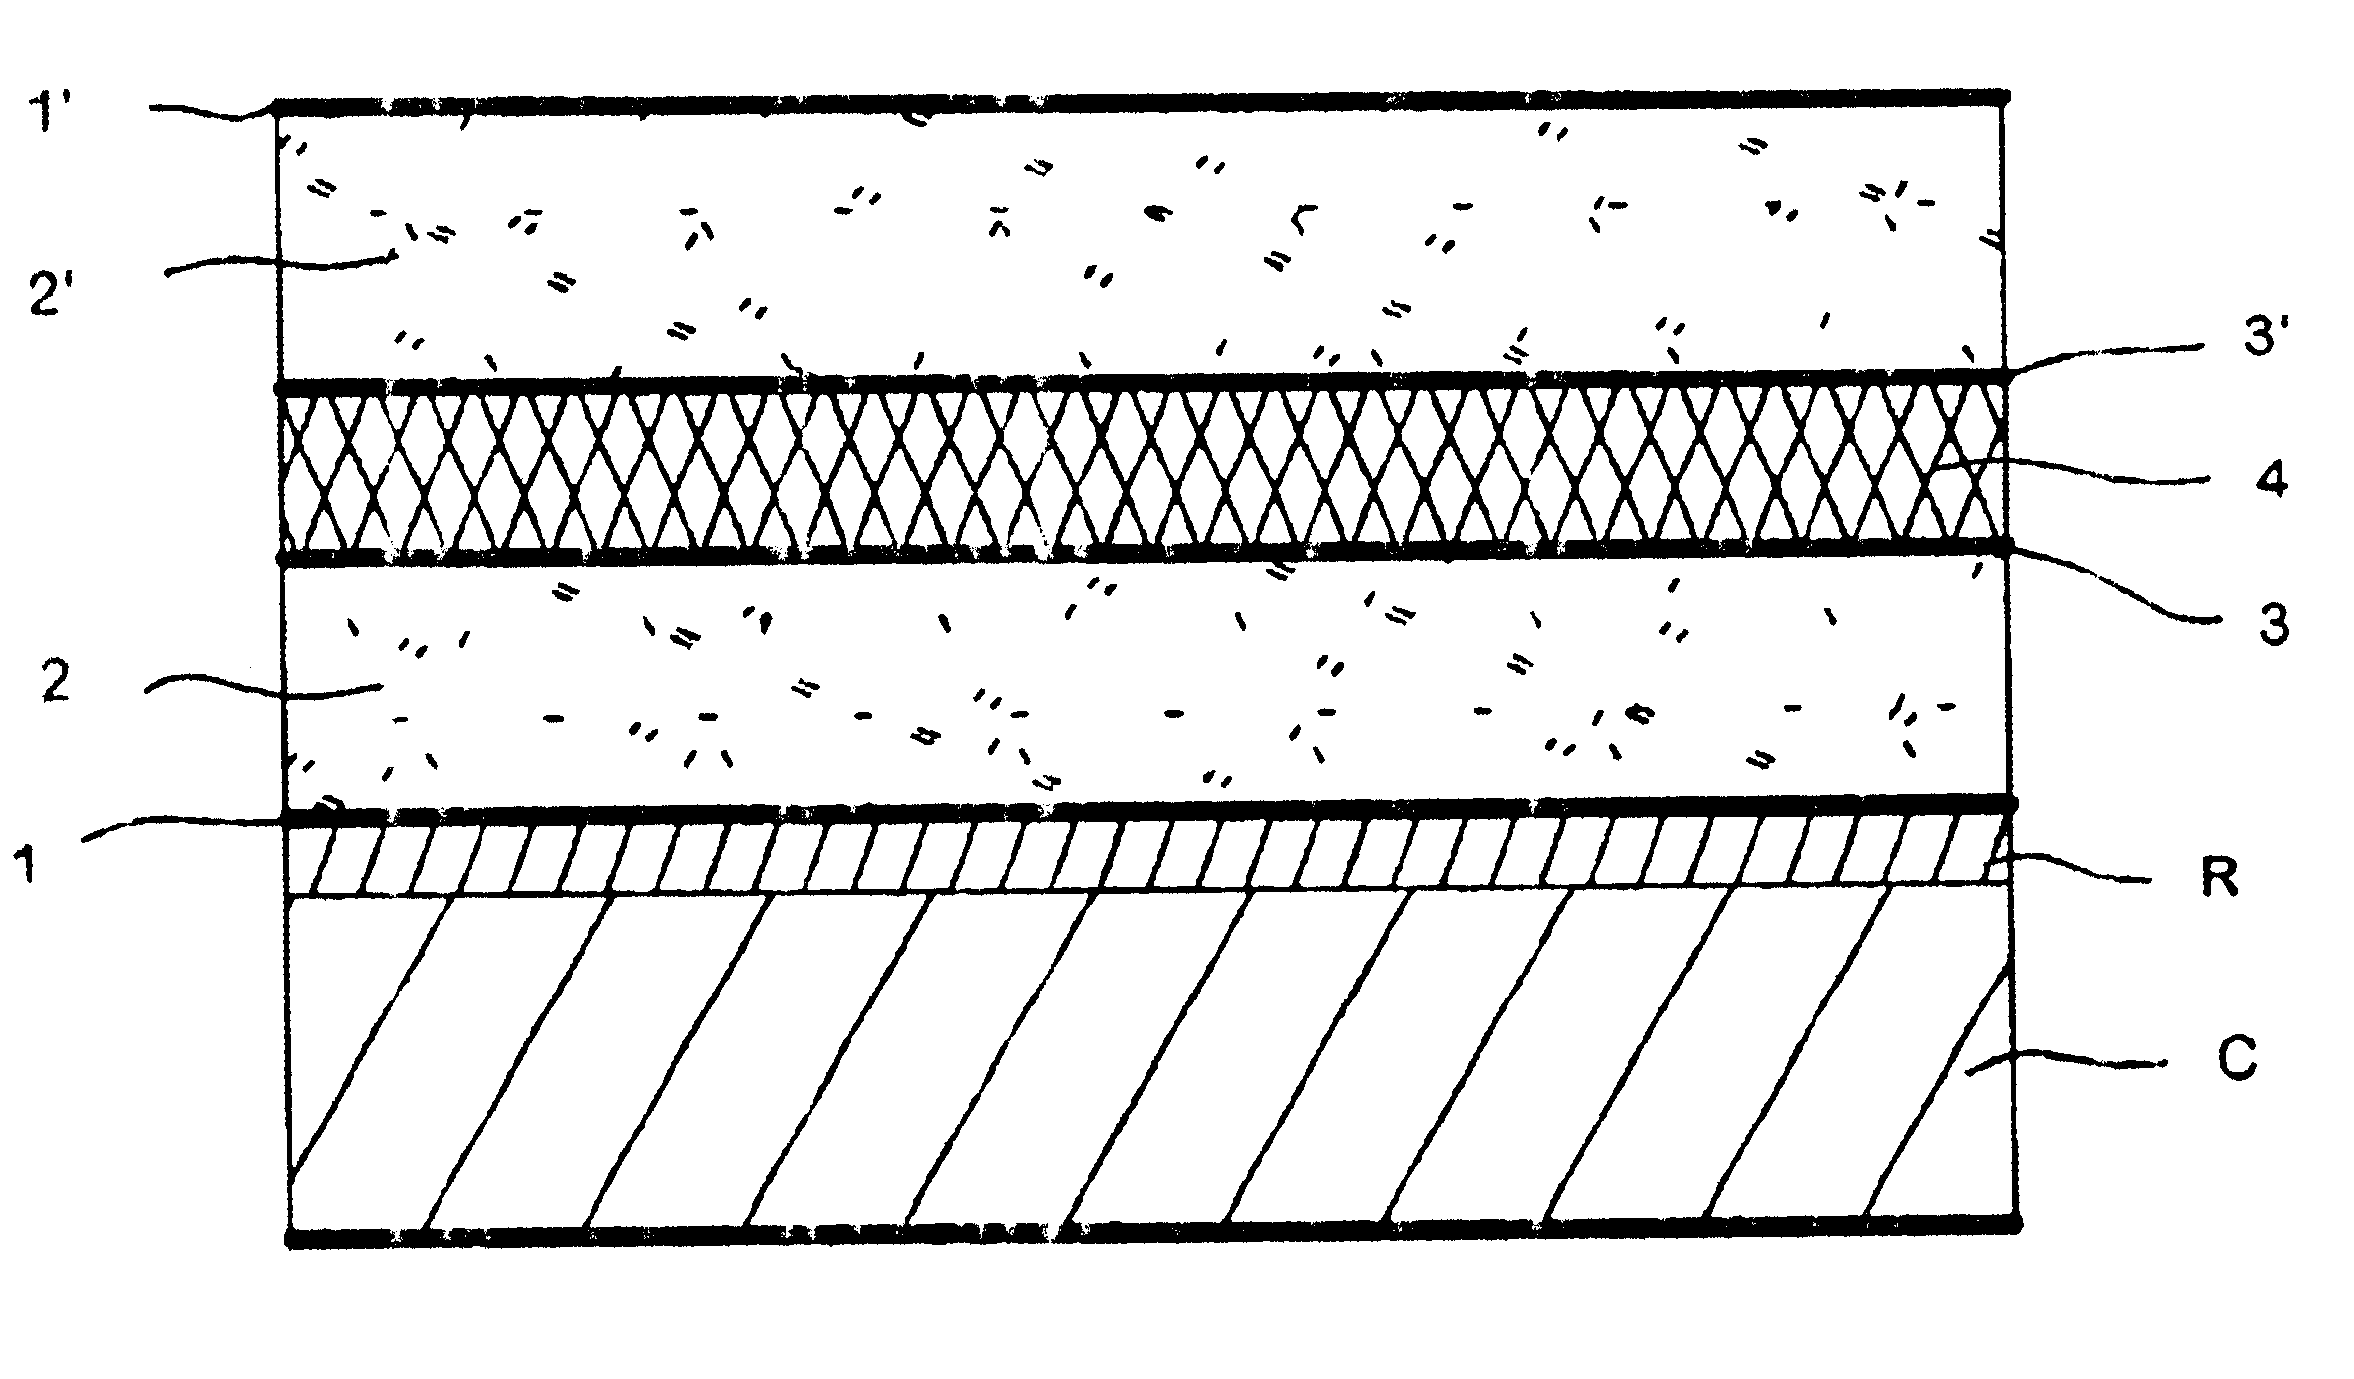 Magnetic thin film interference device or pigment and method of making it, printing ink or coating composition, security document and use of such a magnetic thin film interference device